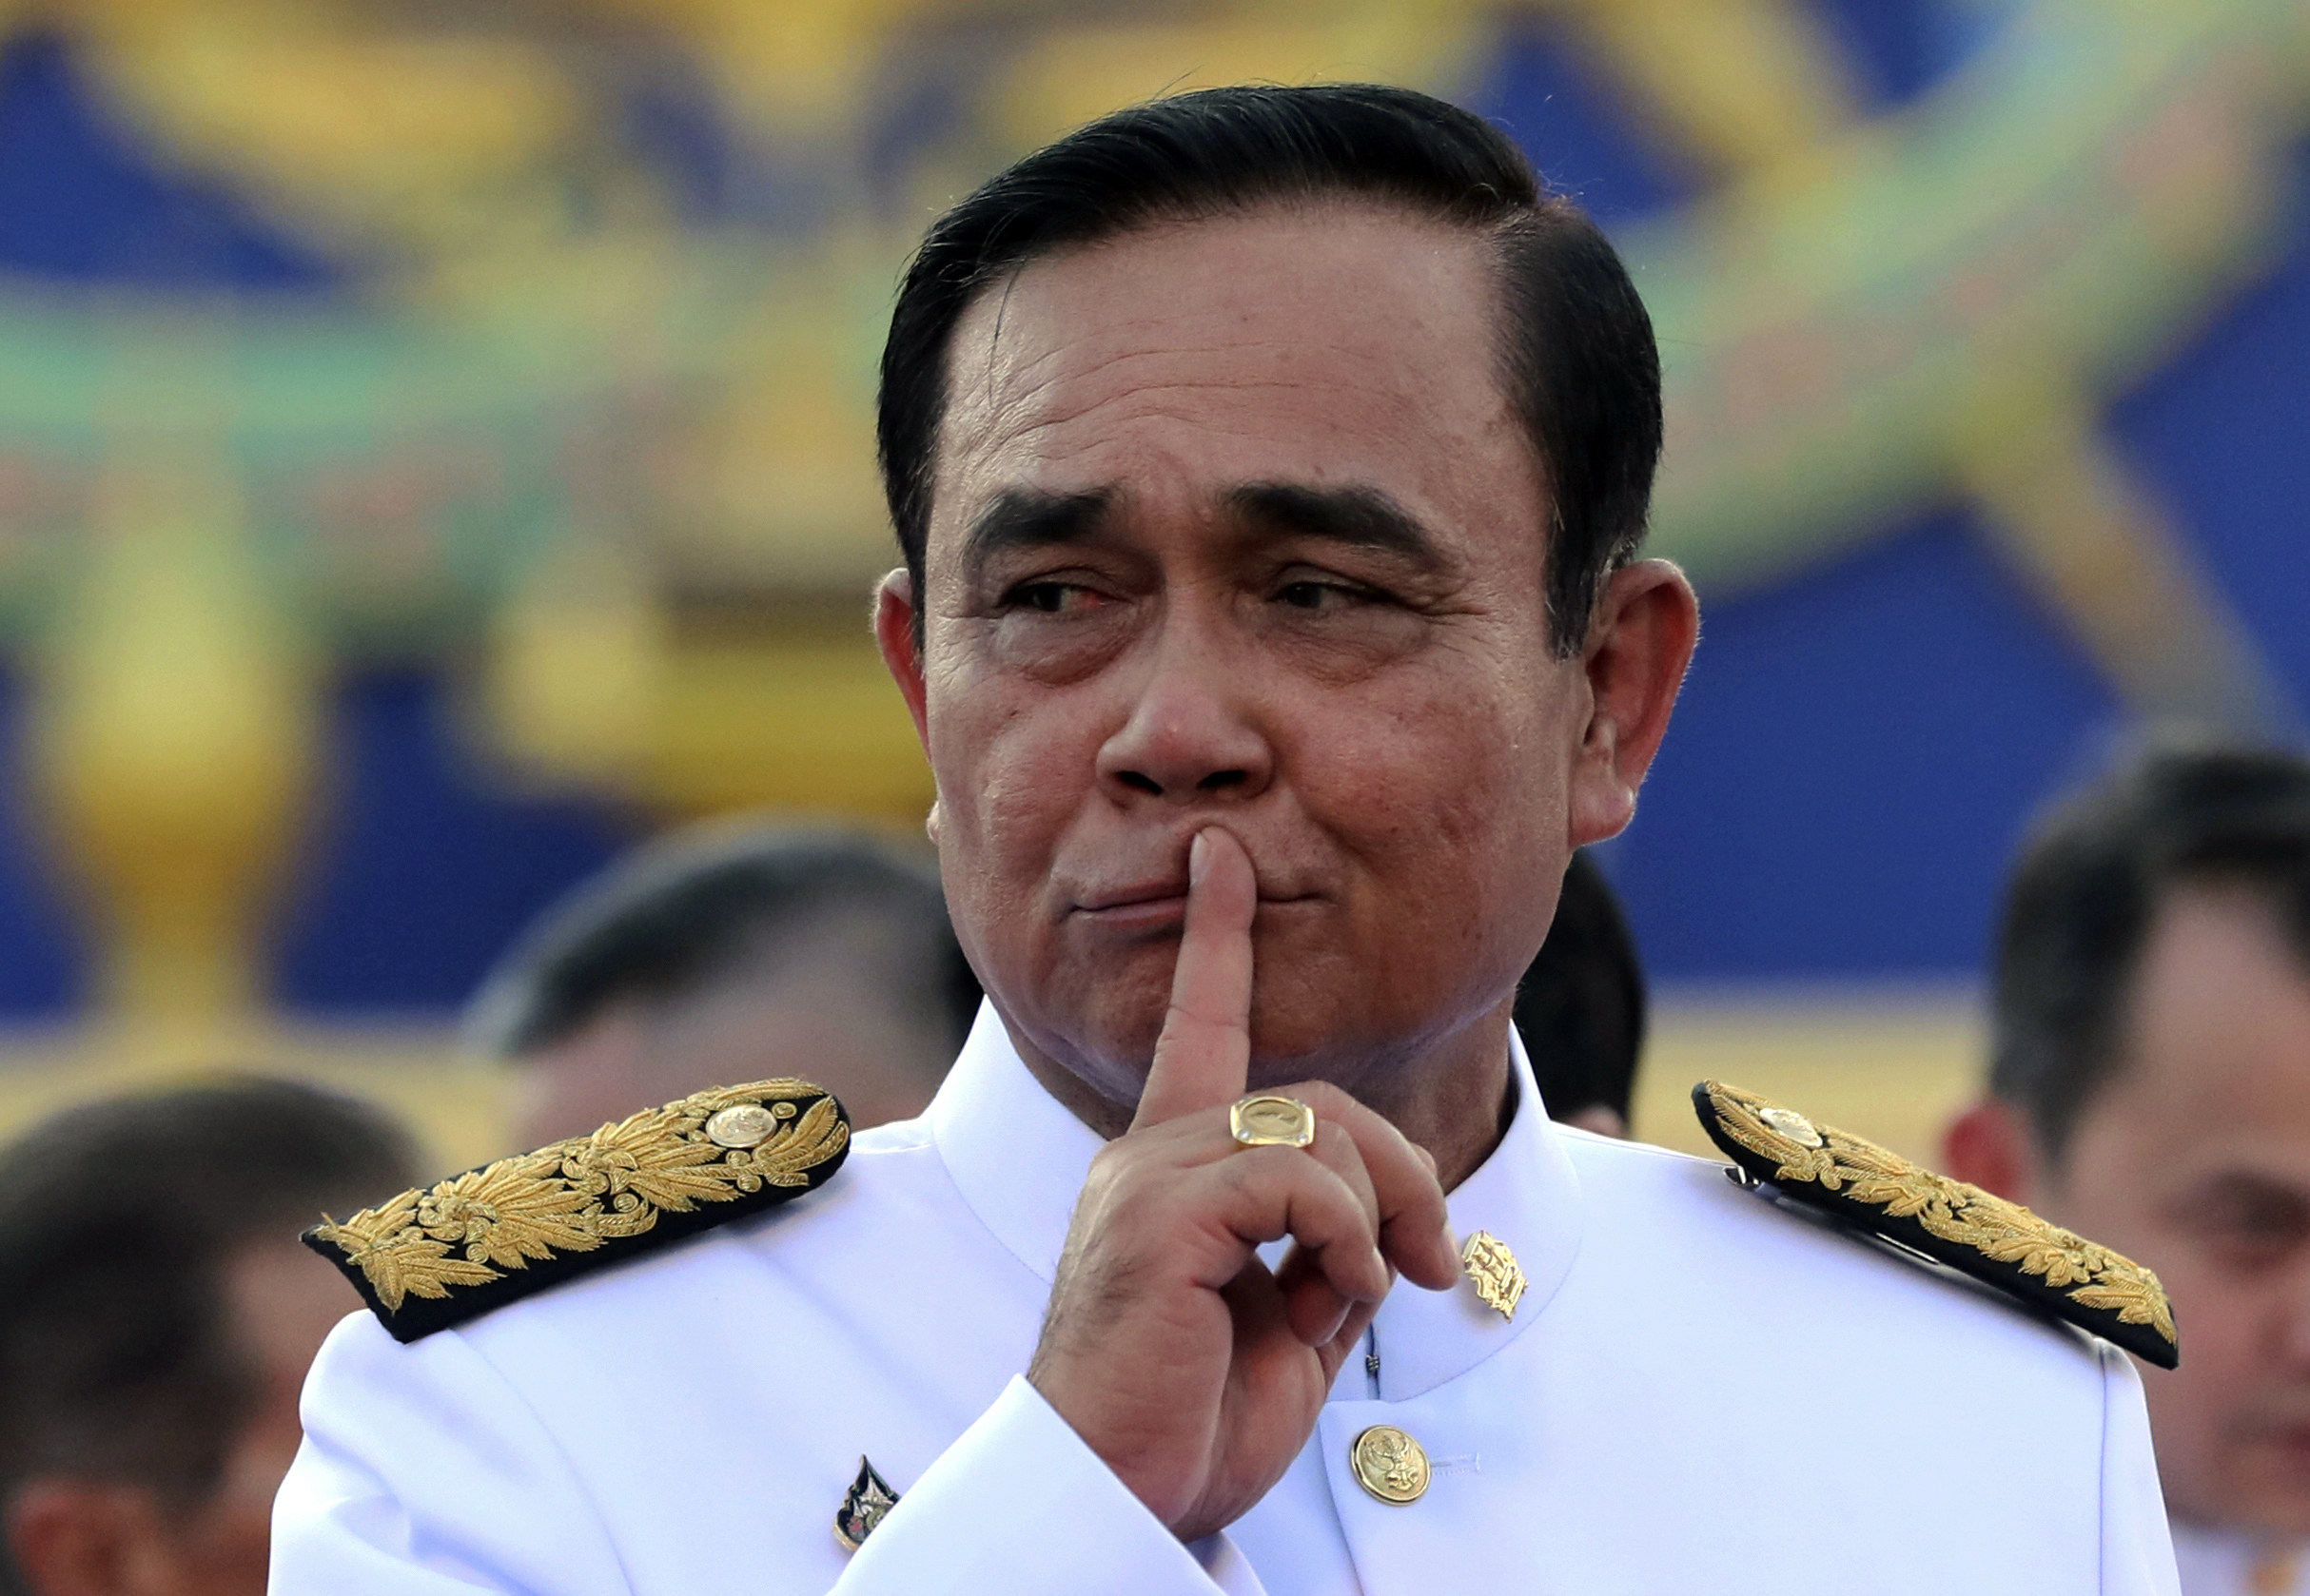 Prime Minister Prayuth Chan-ocha gestures after a group photo call with his cabinet members at Thailand’s Government House in 2019. Photo: AP